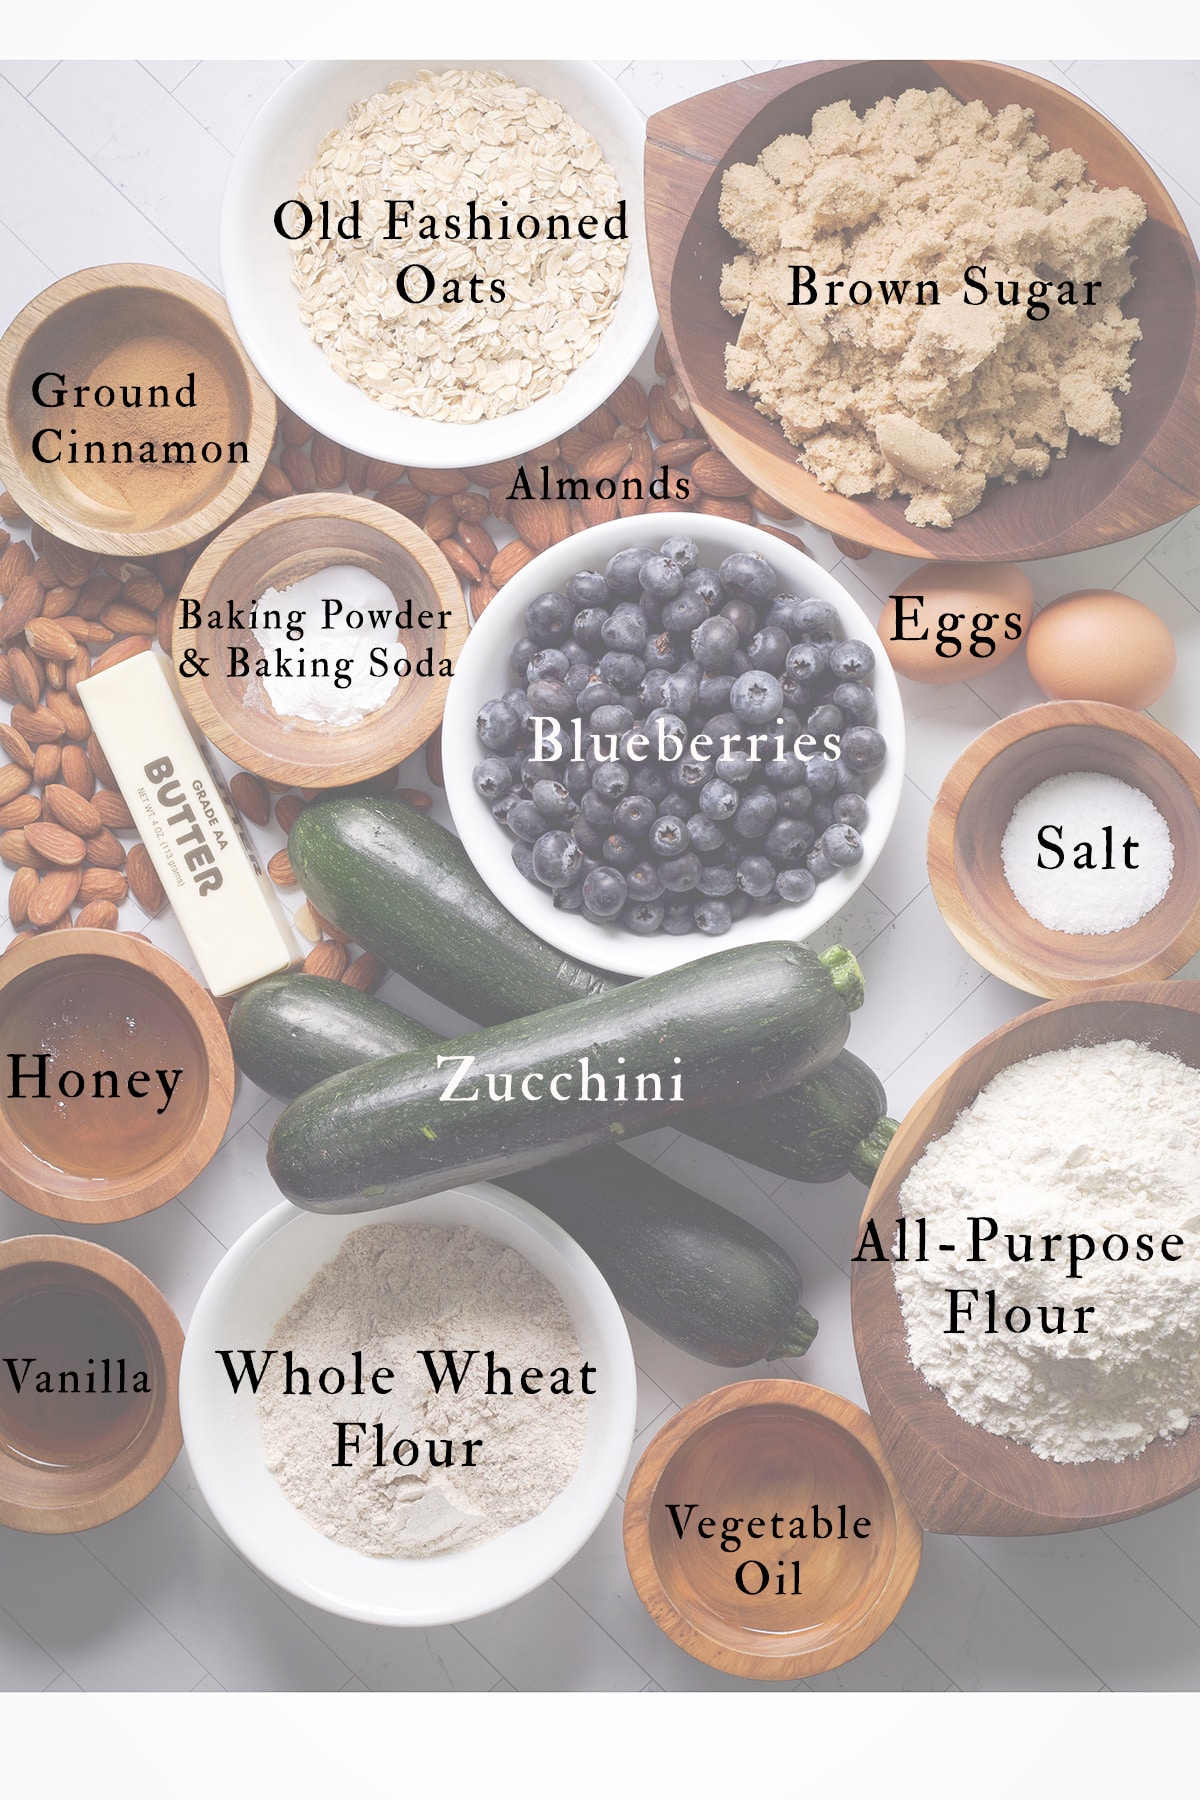 All of the ingredients needed to make Zucchini Blueberry Muffins.